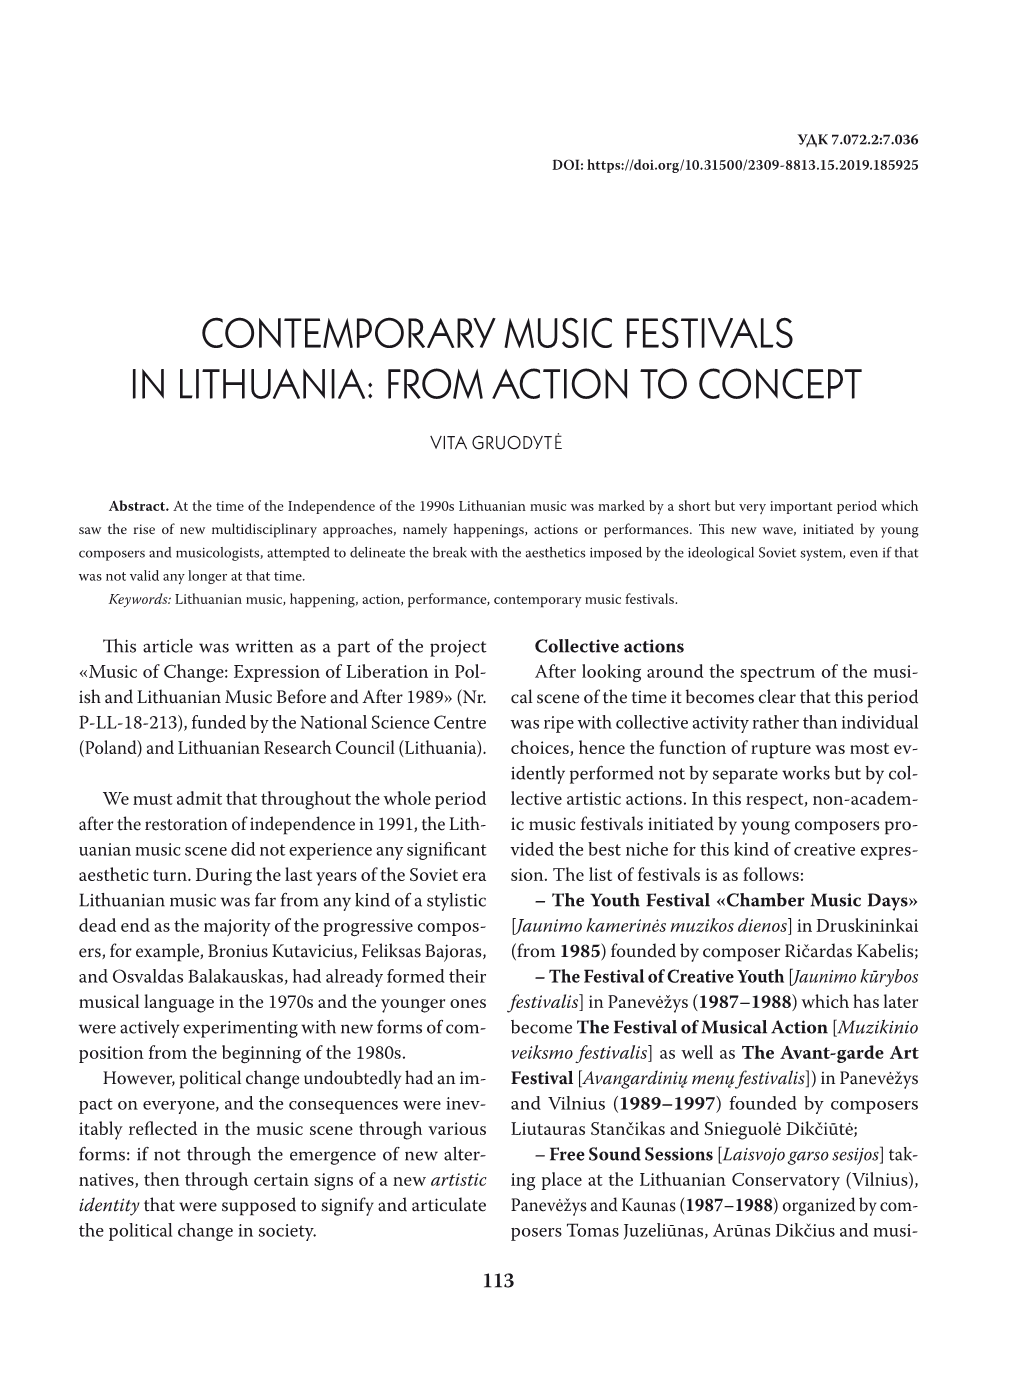 Contemporary Music Festivals in Lithuania: from Action to Concept